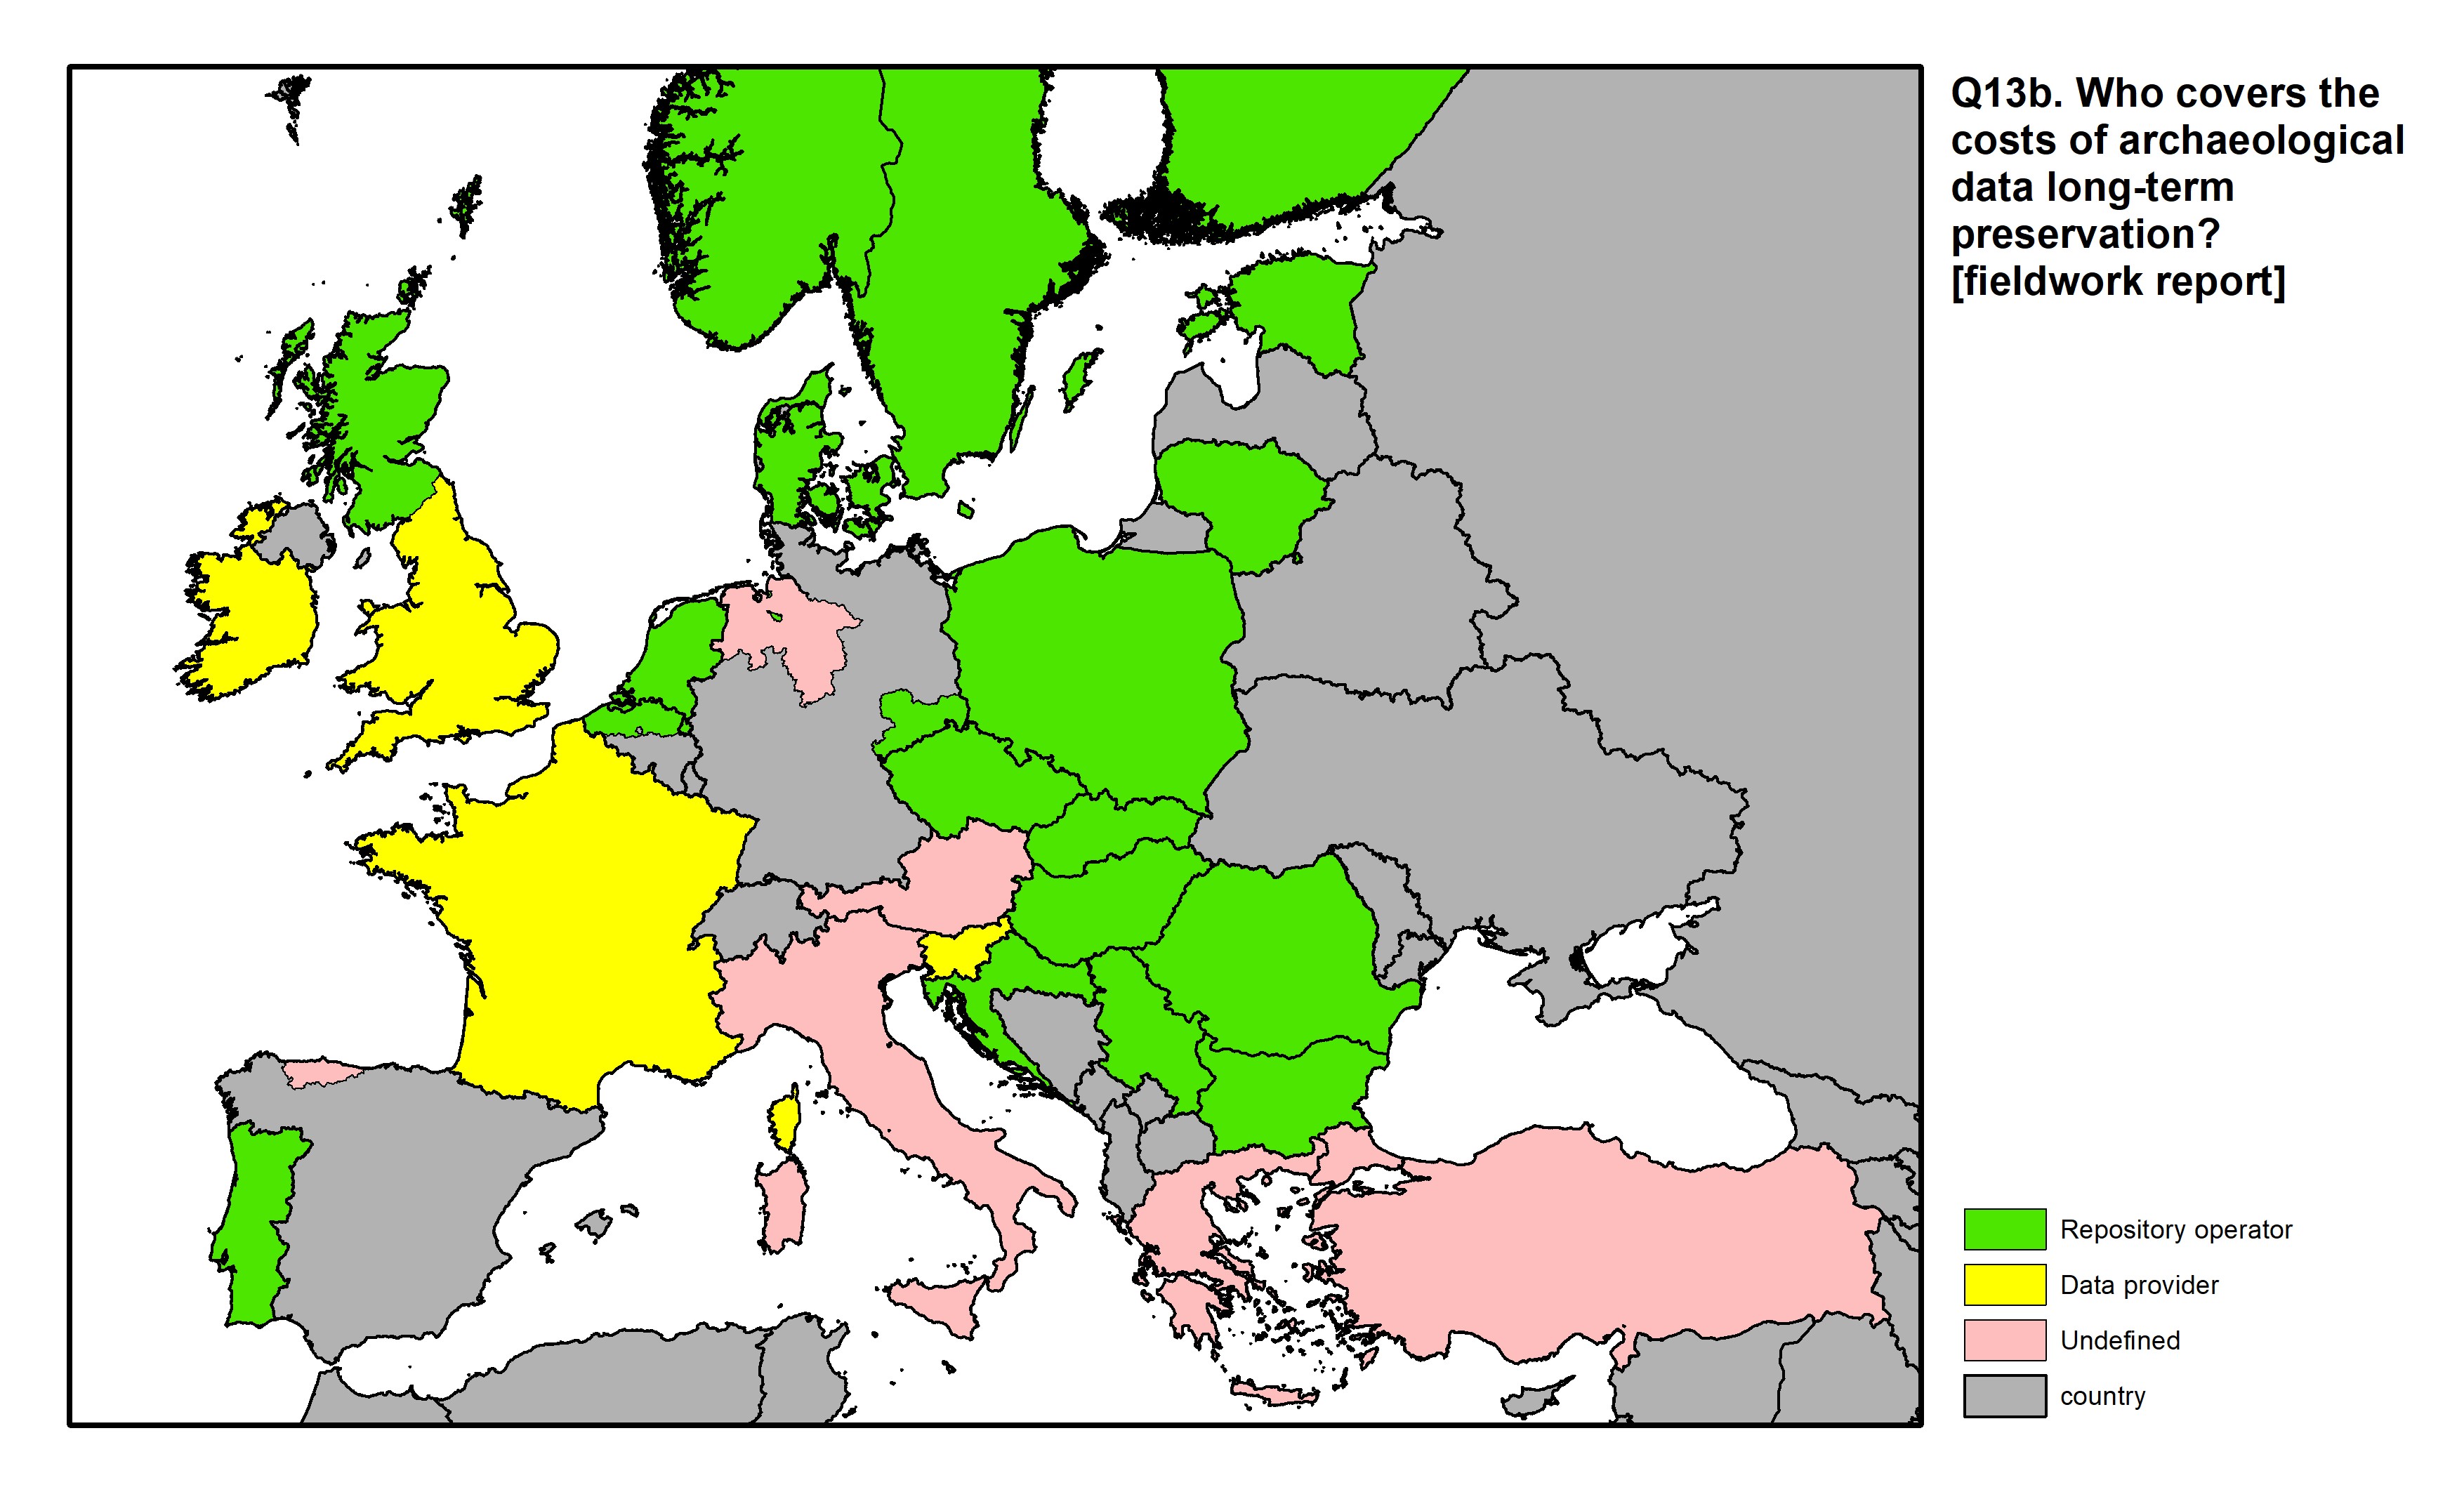 Figure 44: a map of Europe showing countries and regions in colour based on response rates to the survey question.